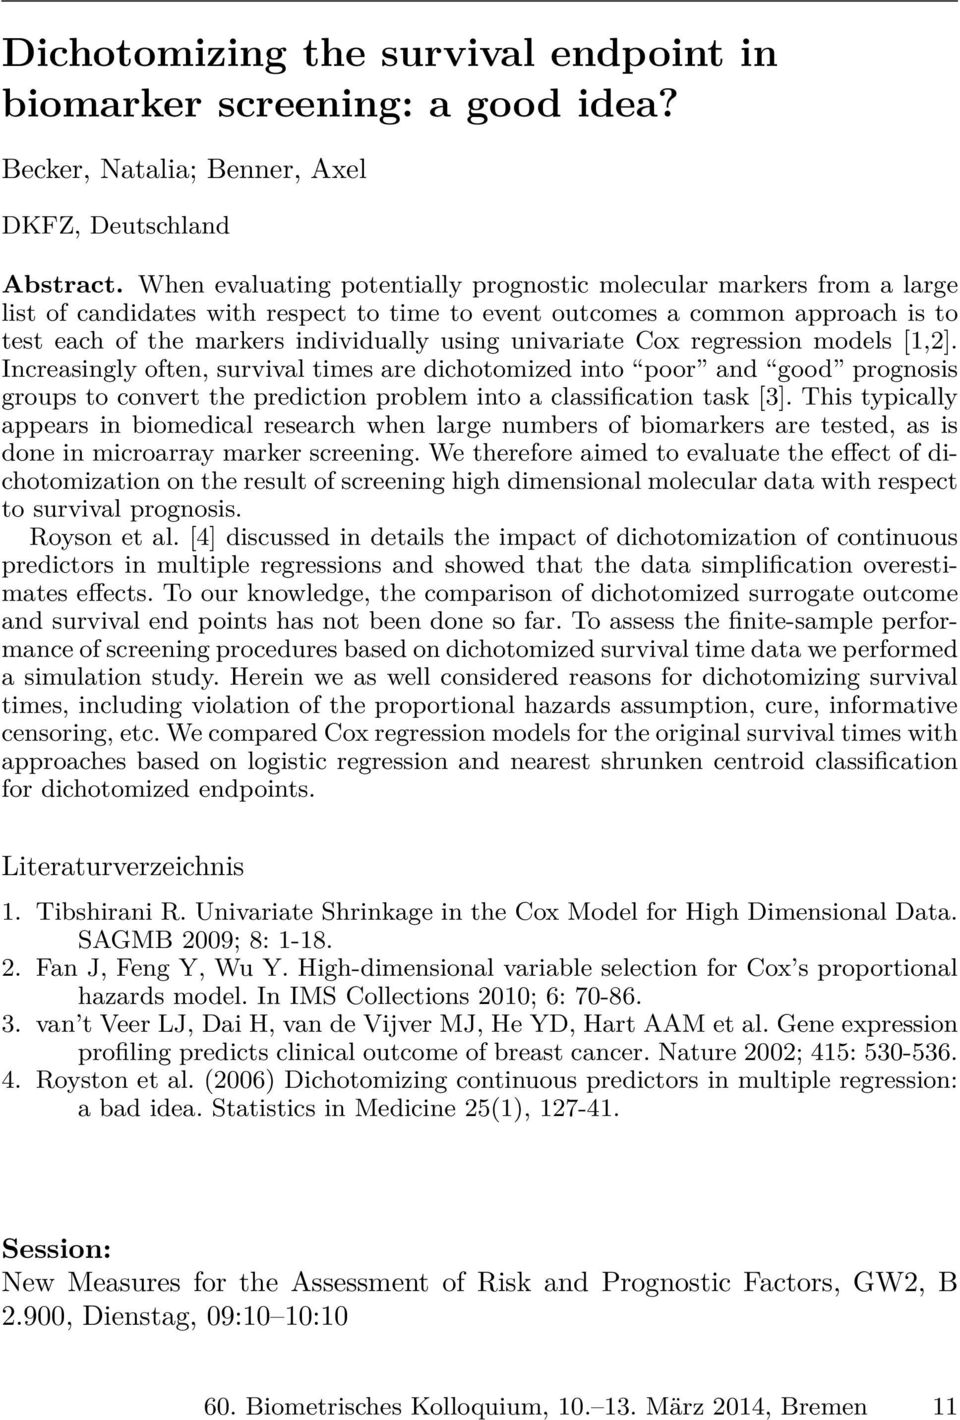 univariate Cox regression models [1,2]. Increasingly often, survival times are dichotomized into poor and good prognosis groups to convert the prediction problem into a classification task [3].